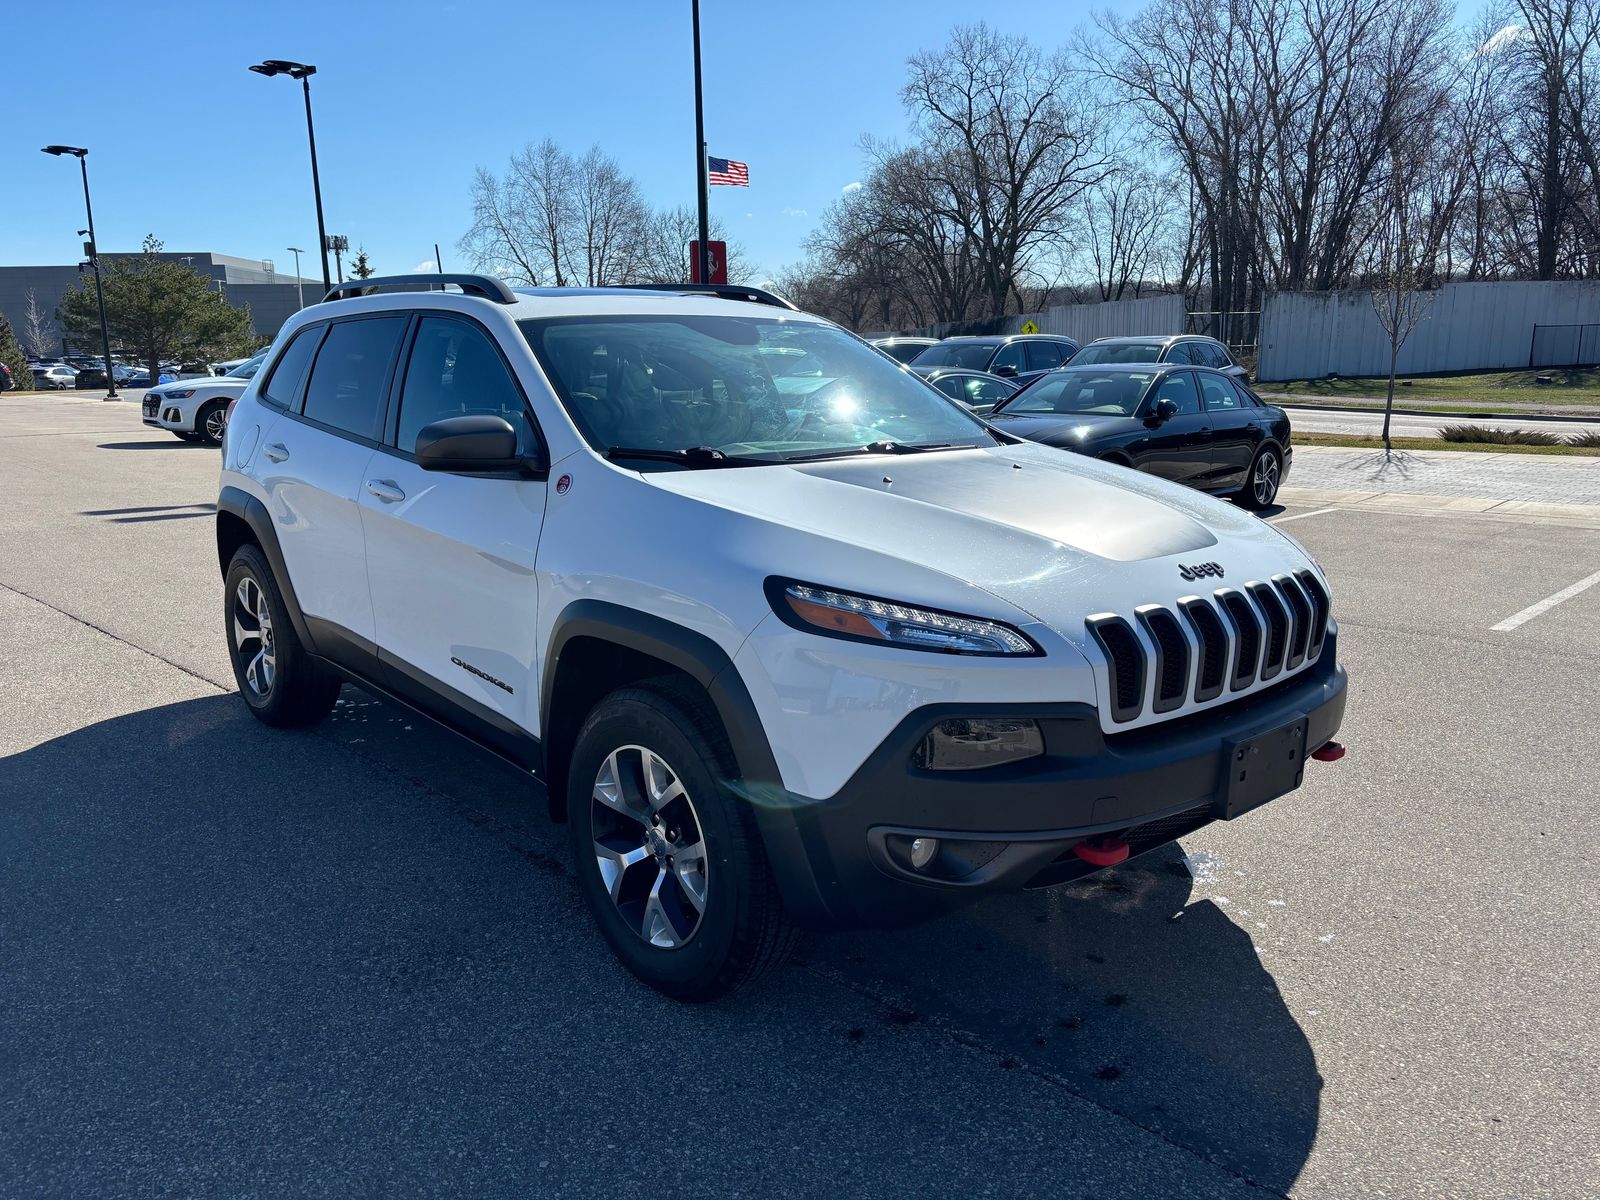 Used 2017 Jeep Cherokee Trailhawk with VIN 1C4PJMBS6HW538339 for sale in Minneapolis, Minnesota